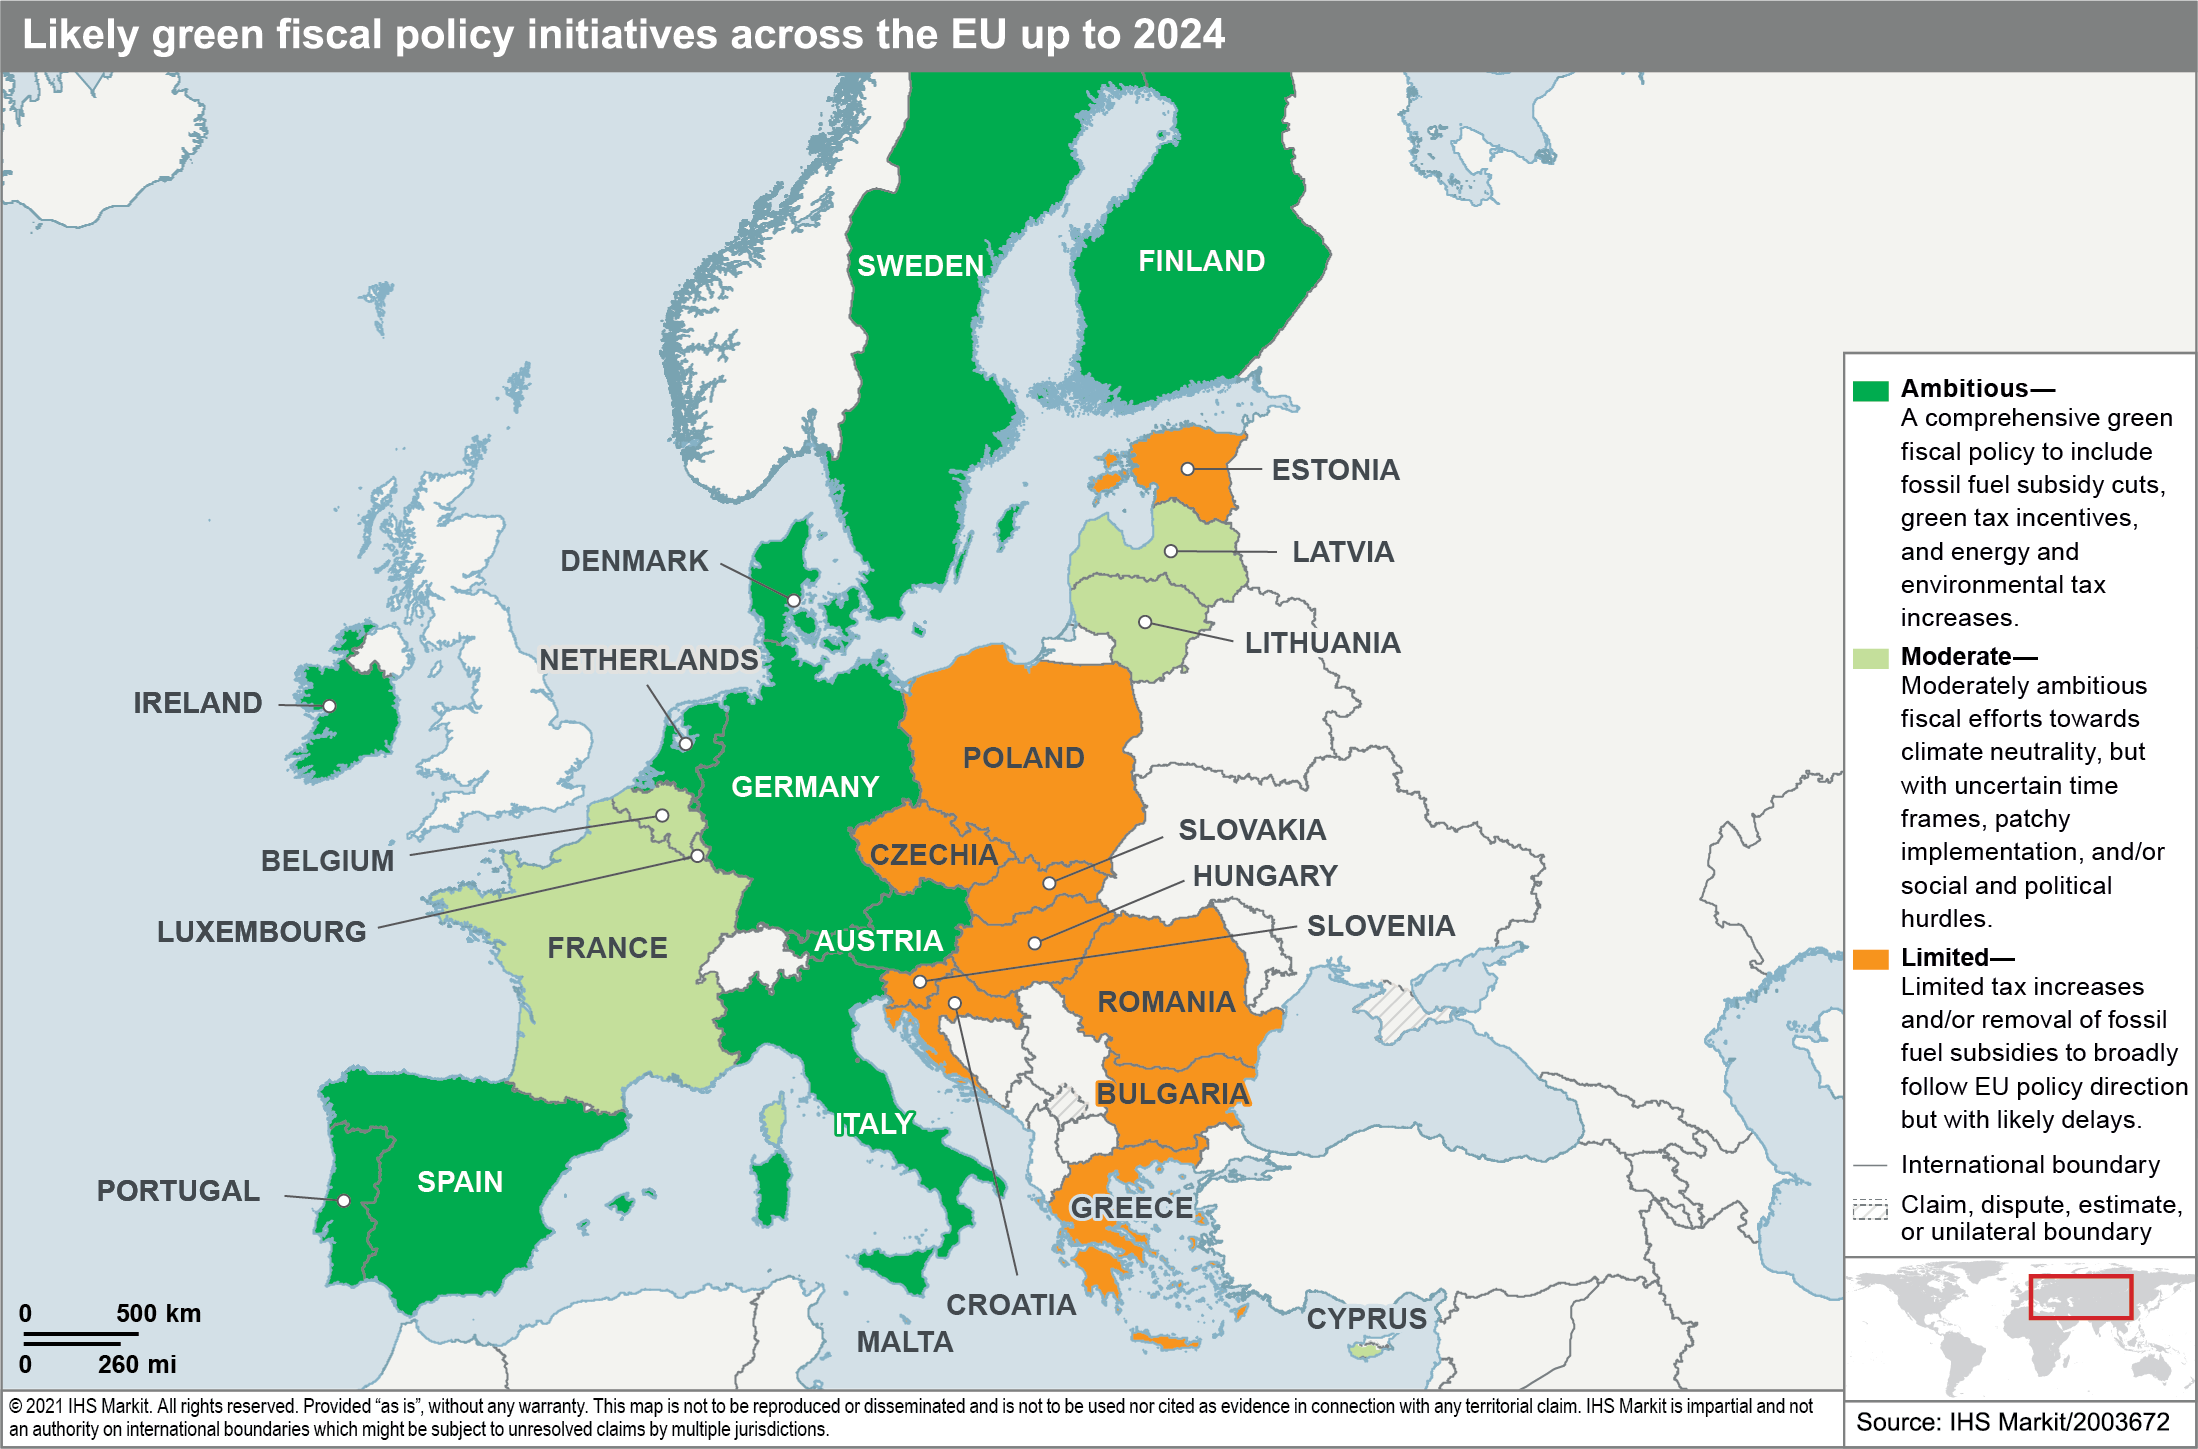 Likely green fiscal policy initiatives across the EU up to 2024